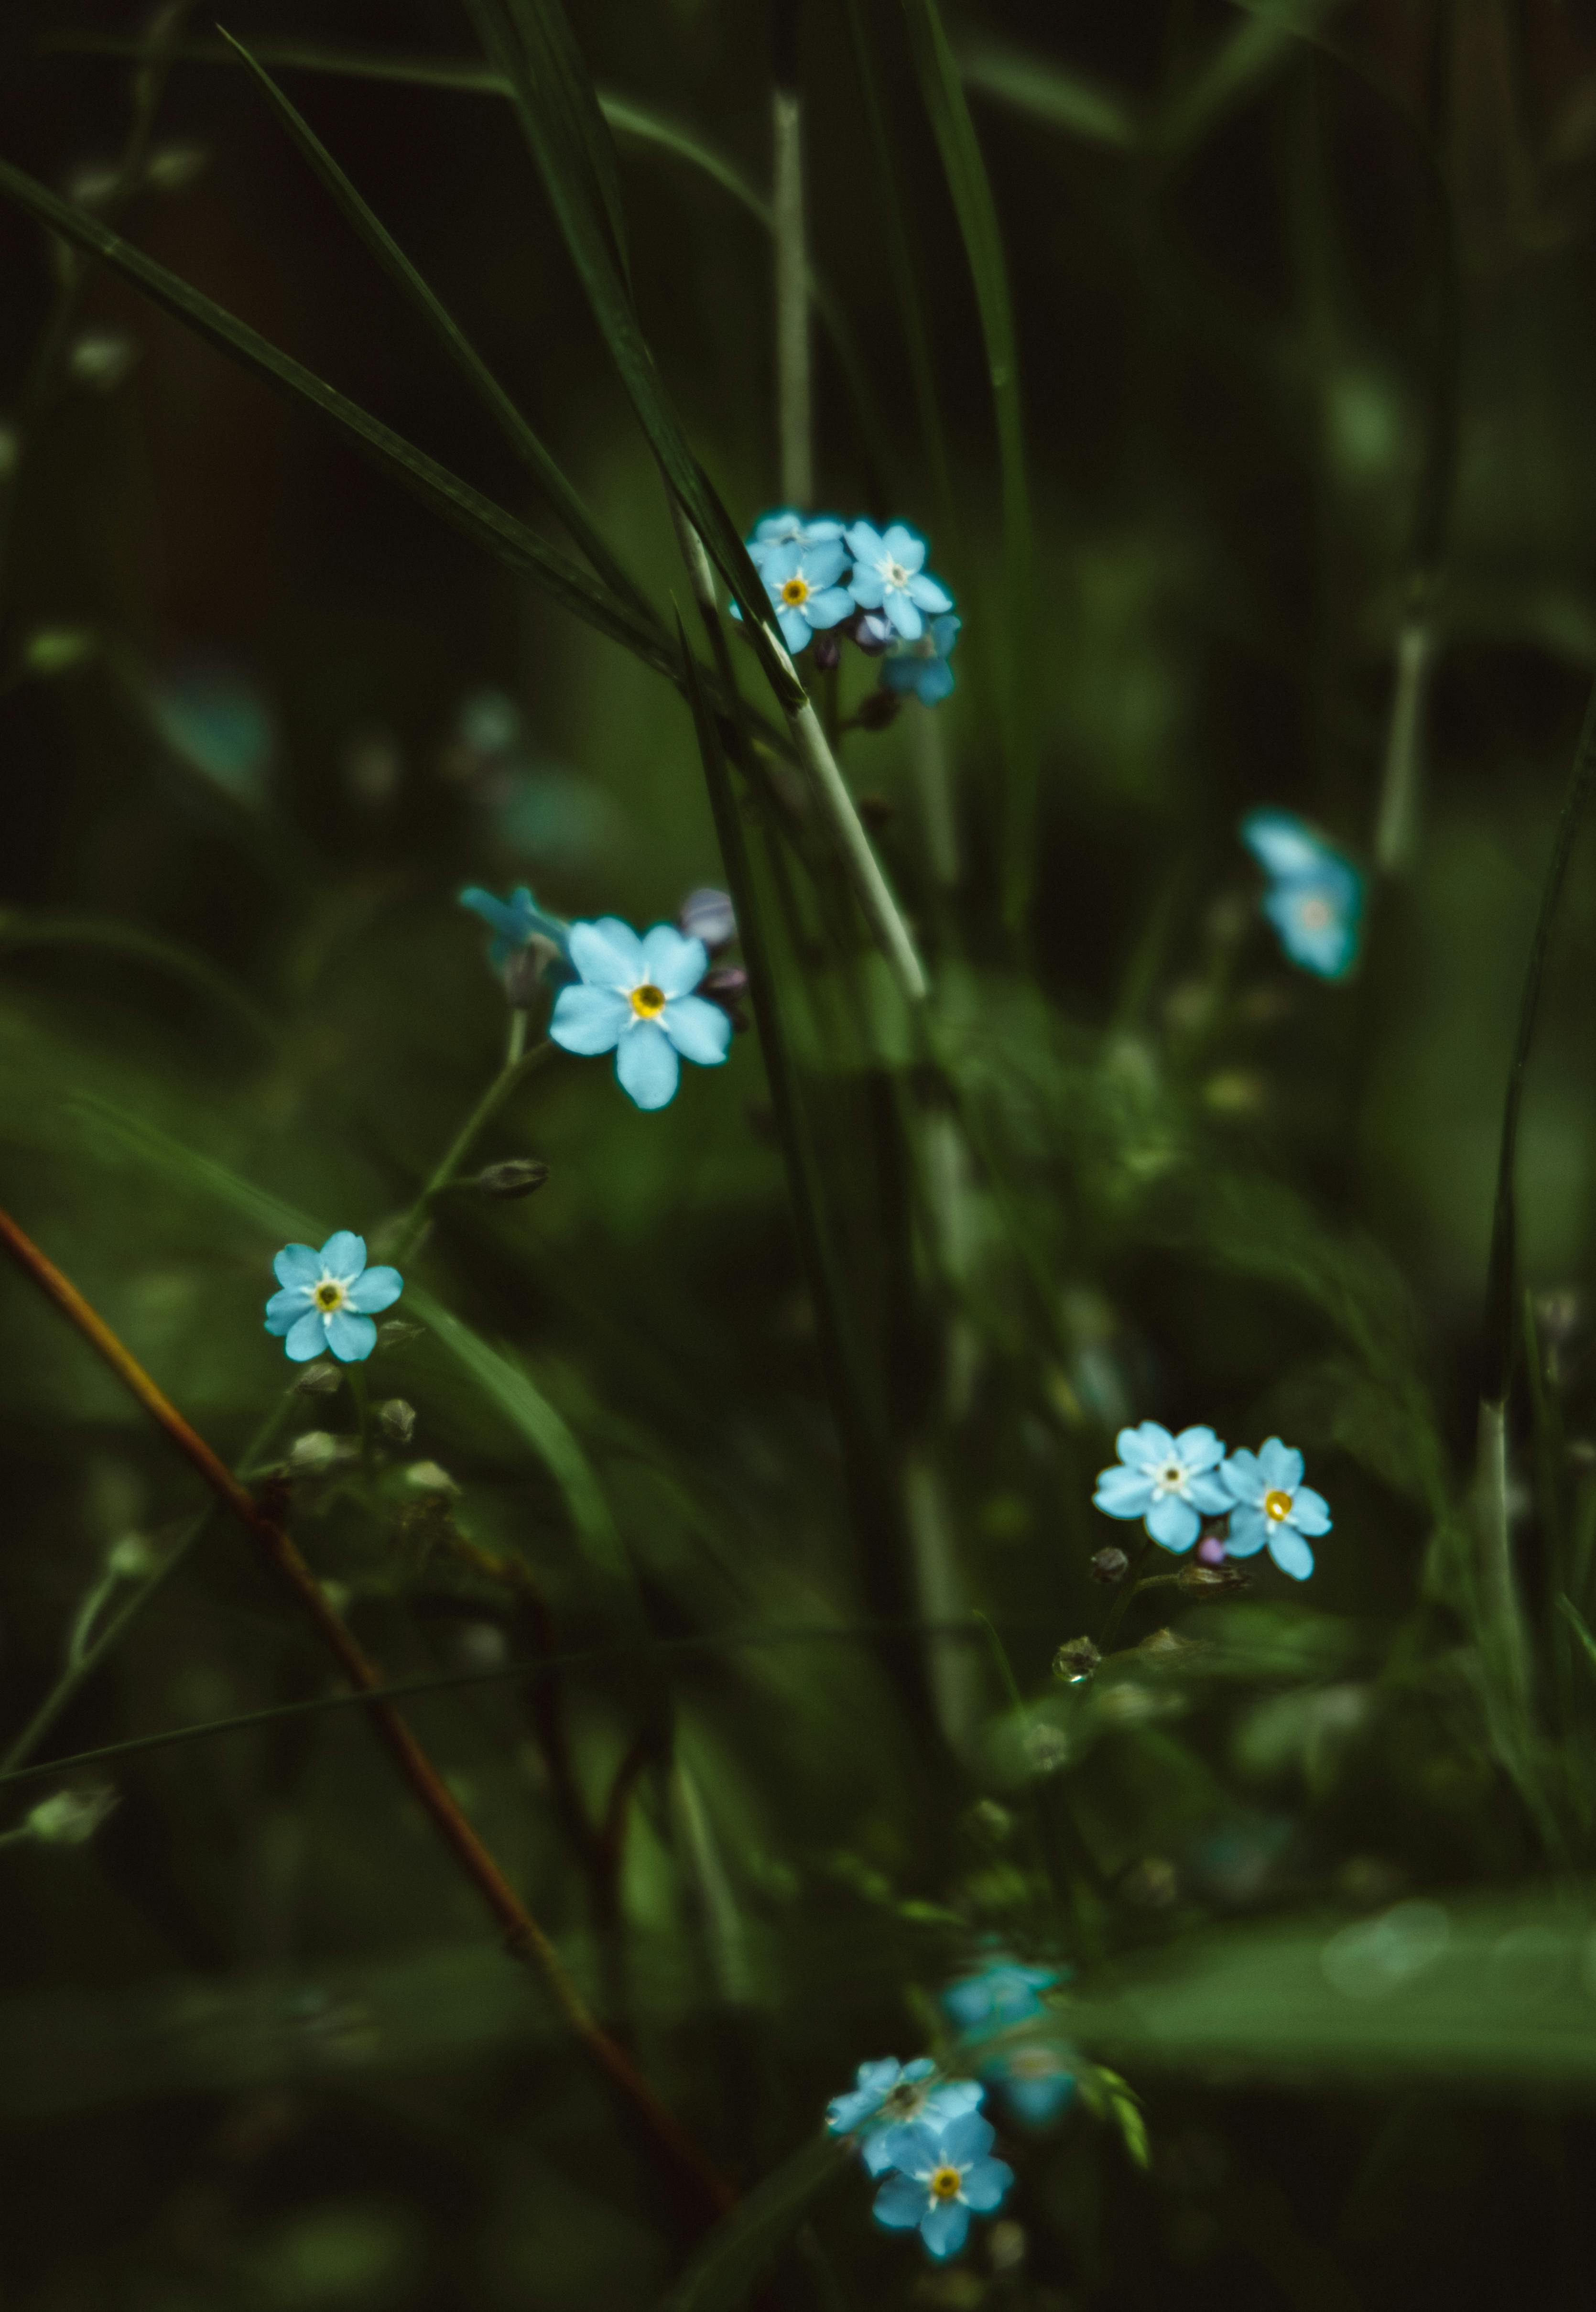 10 ForgetMeNot HD Wallpapers and Backgrounds